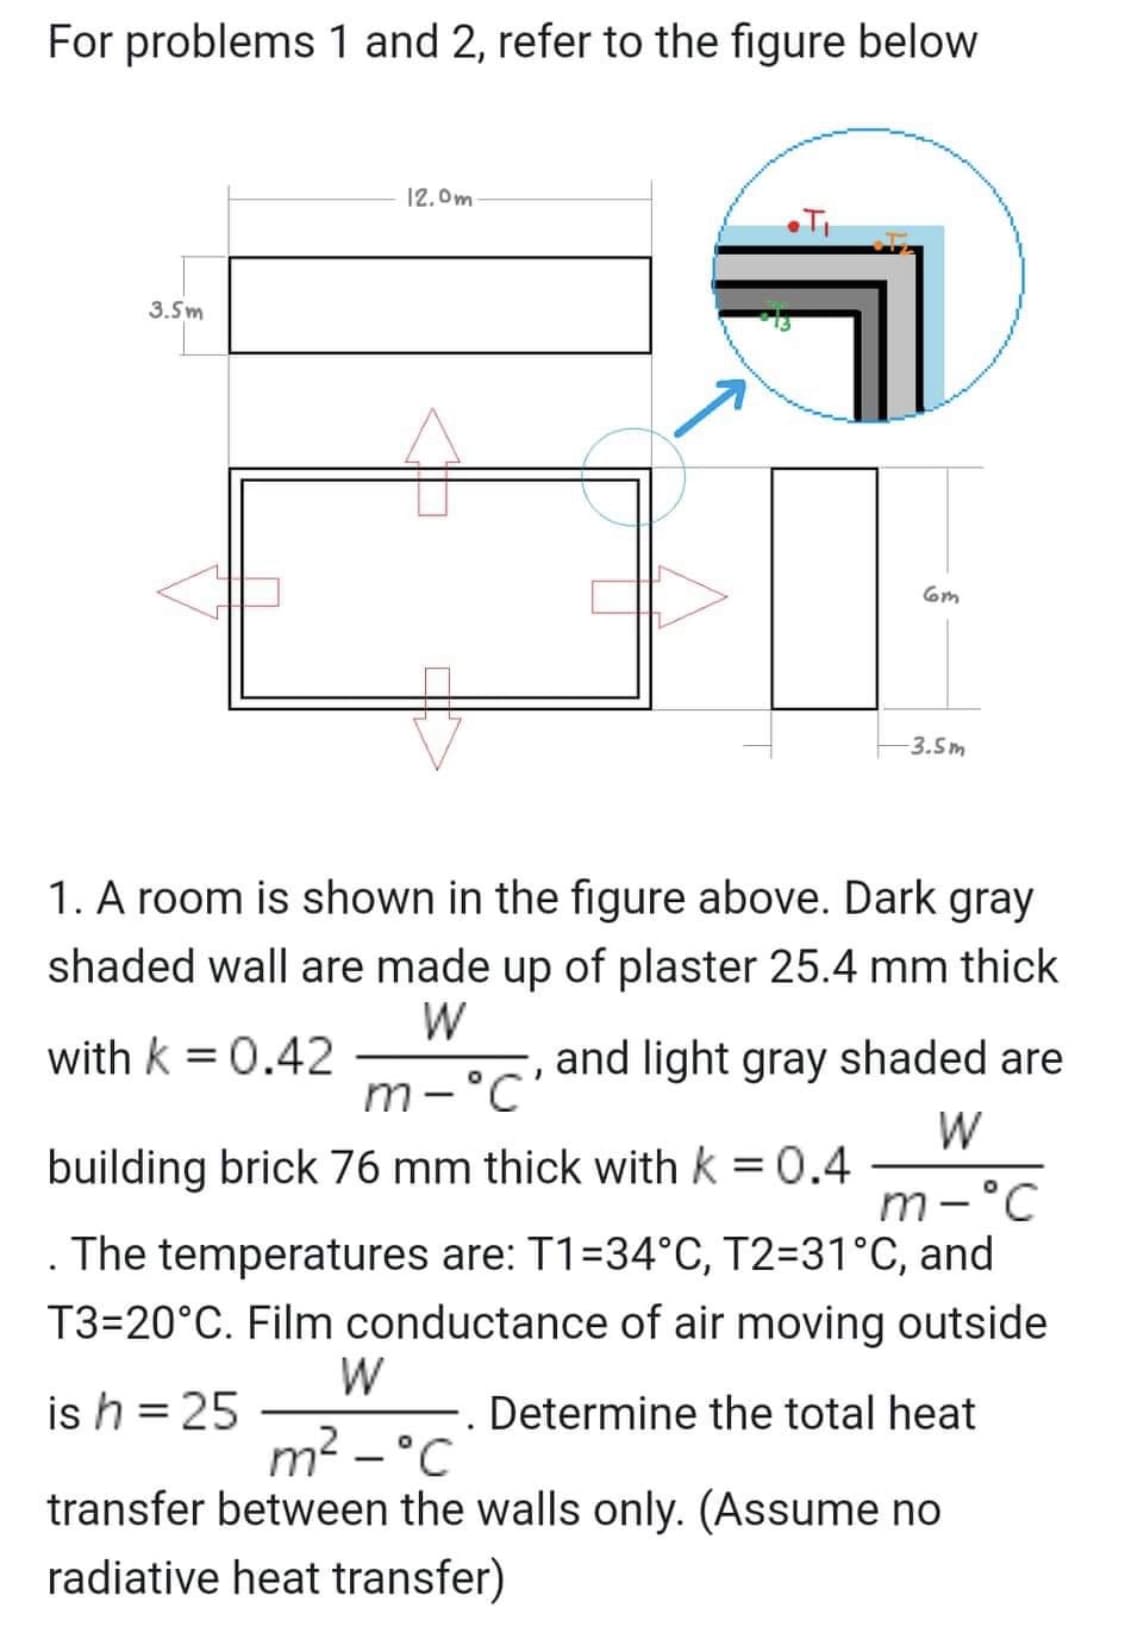 For problems 1 and 2, refer to the figure below
3.5m
12.0m
6m
-3.5m
1. A room is shown in the figure above. Dark gray
shaded wall are made up of plaster 25.4 mm thick
W
with k = 0.42
and light gray shaded are
m-'c'
W
building brick 76 mm thick with k = 0.4
m-°C
The temperatures are: T1-34°C, T2=31°C, and
T3-20°C. Film conductance of air moving outside
W
is h = 25
Determine the total heat
m² - °C
transfer between the walls only. (Assume no
radiative heat transfer)